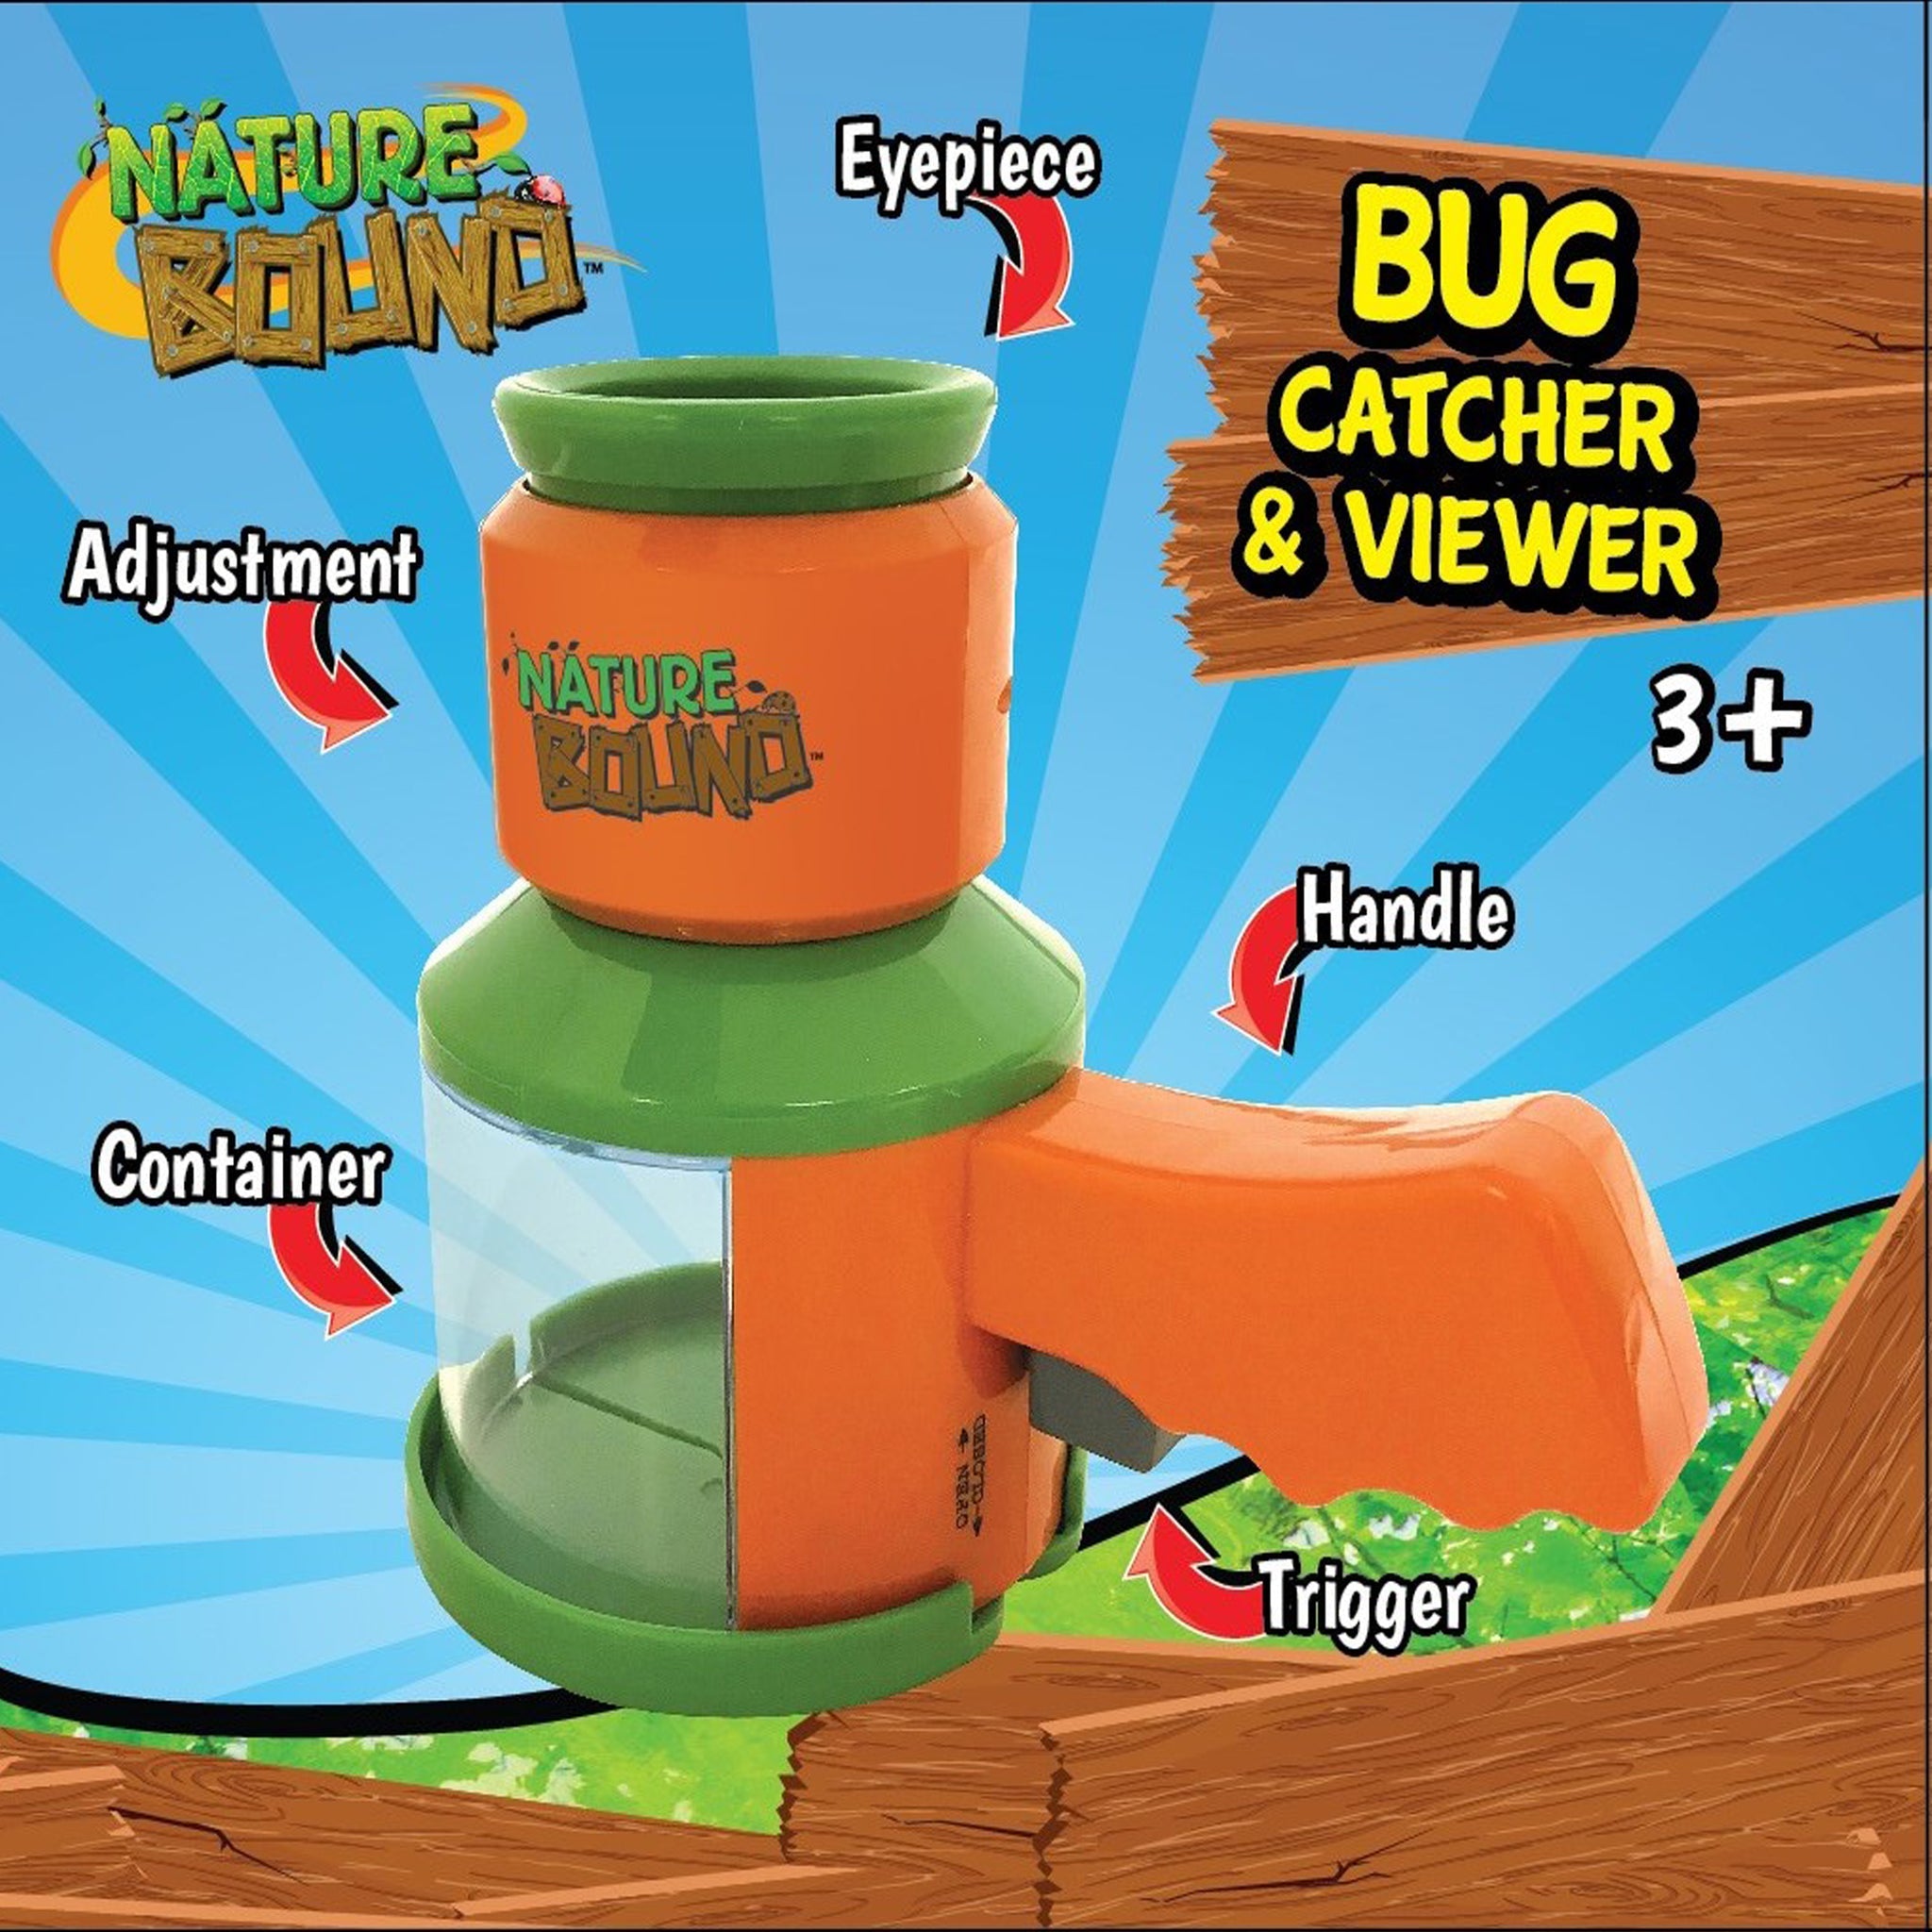 Bug Catcher and Viewer